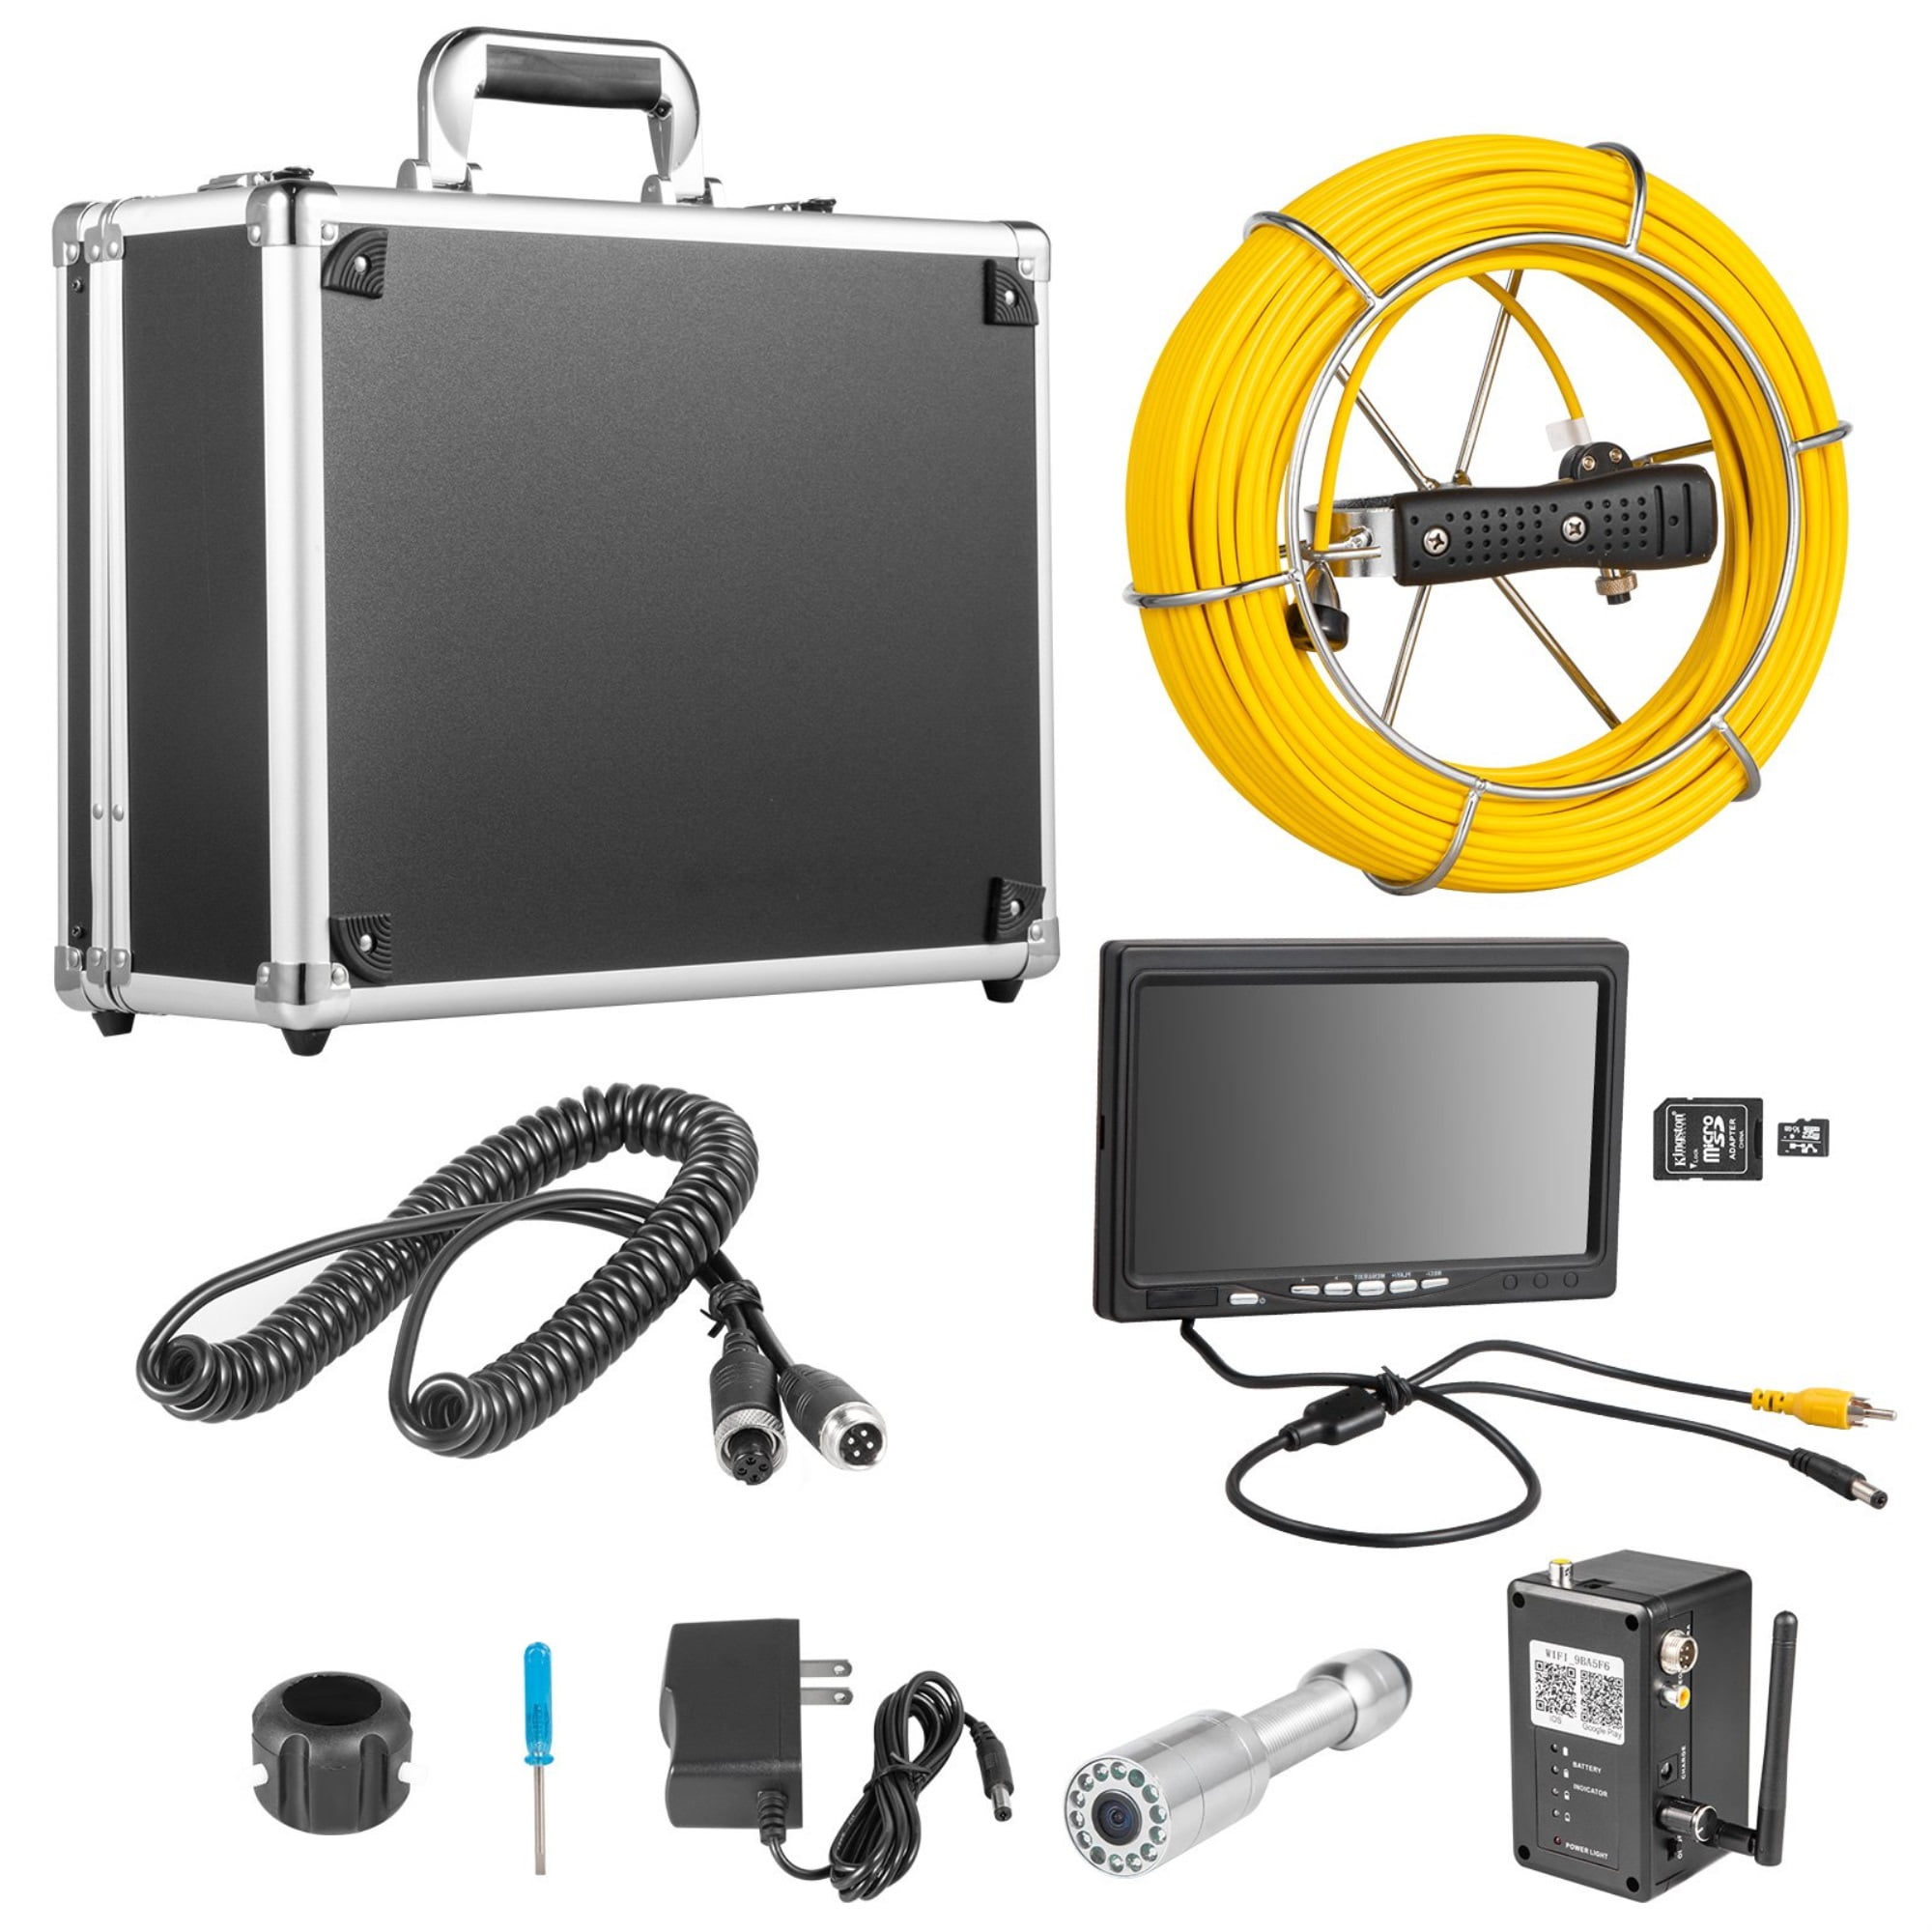 30m Pipeline Inspection Camera Sewer Waterproof 7"Lcd Drain Pipe System With DVR 